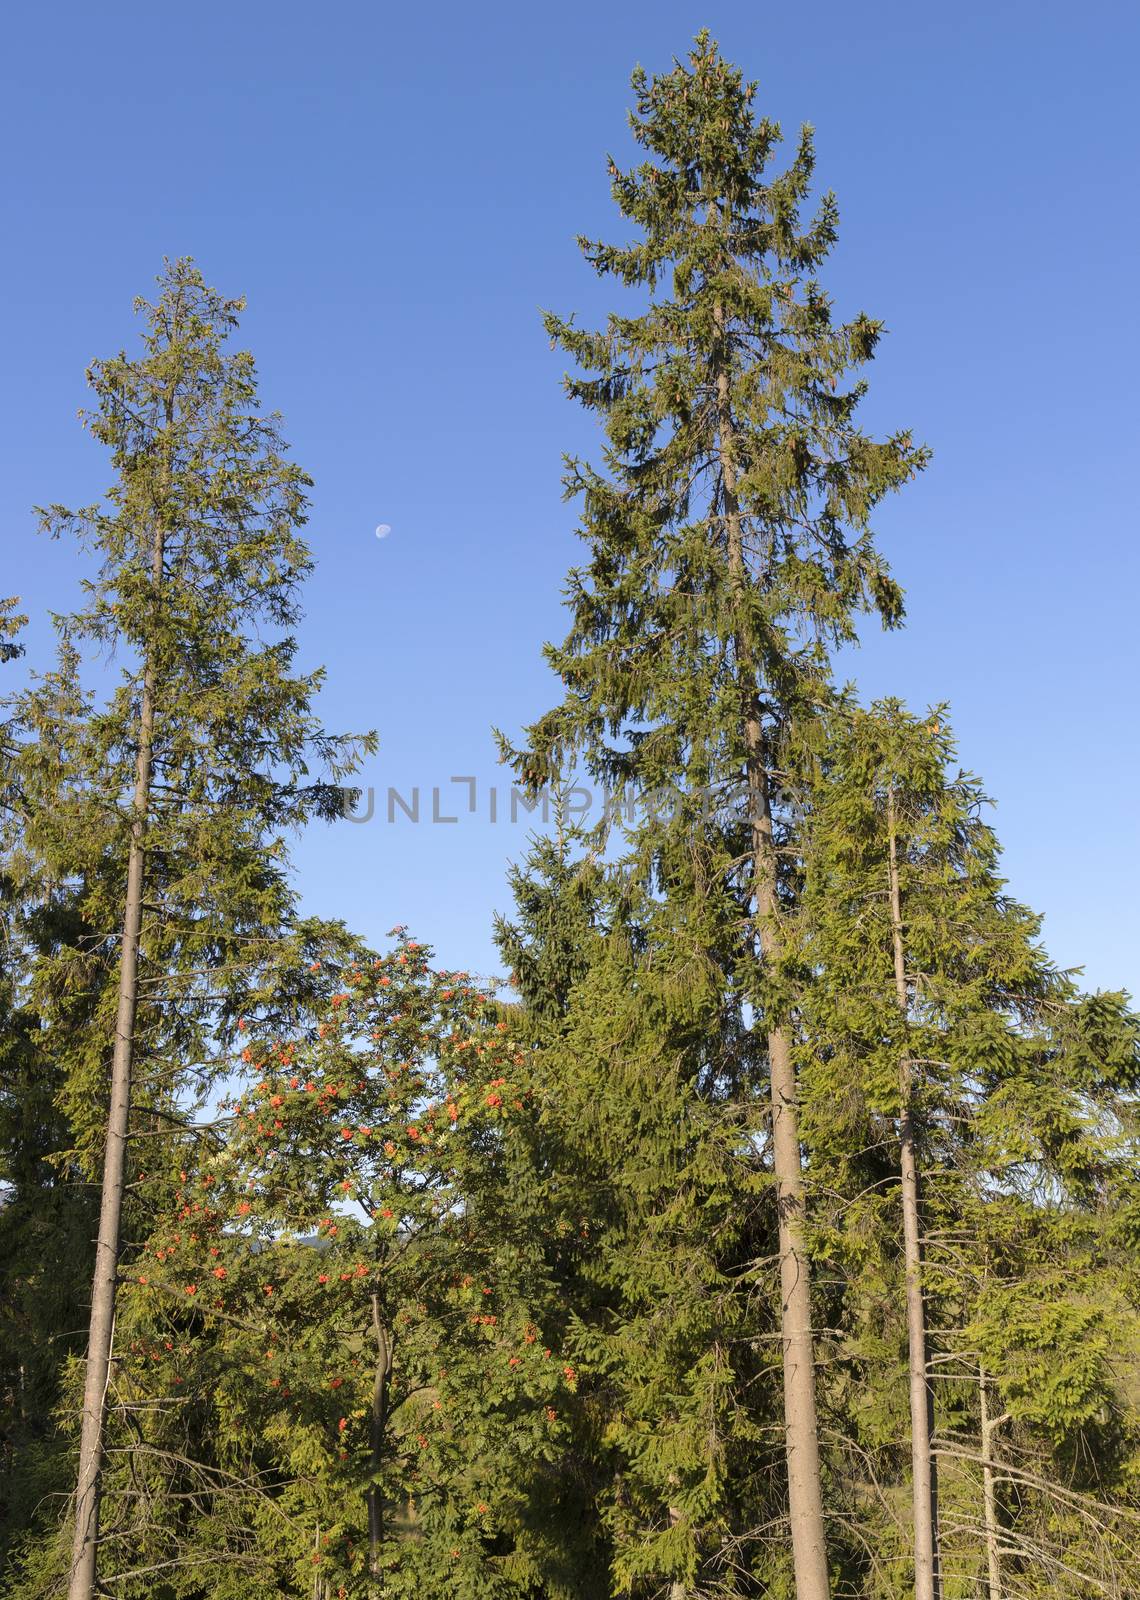 High spruce trees stretch towards the sky, where the moon rose on a bright, sunny day by Sergii